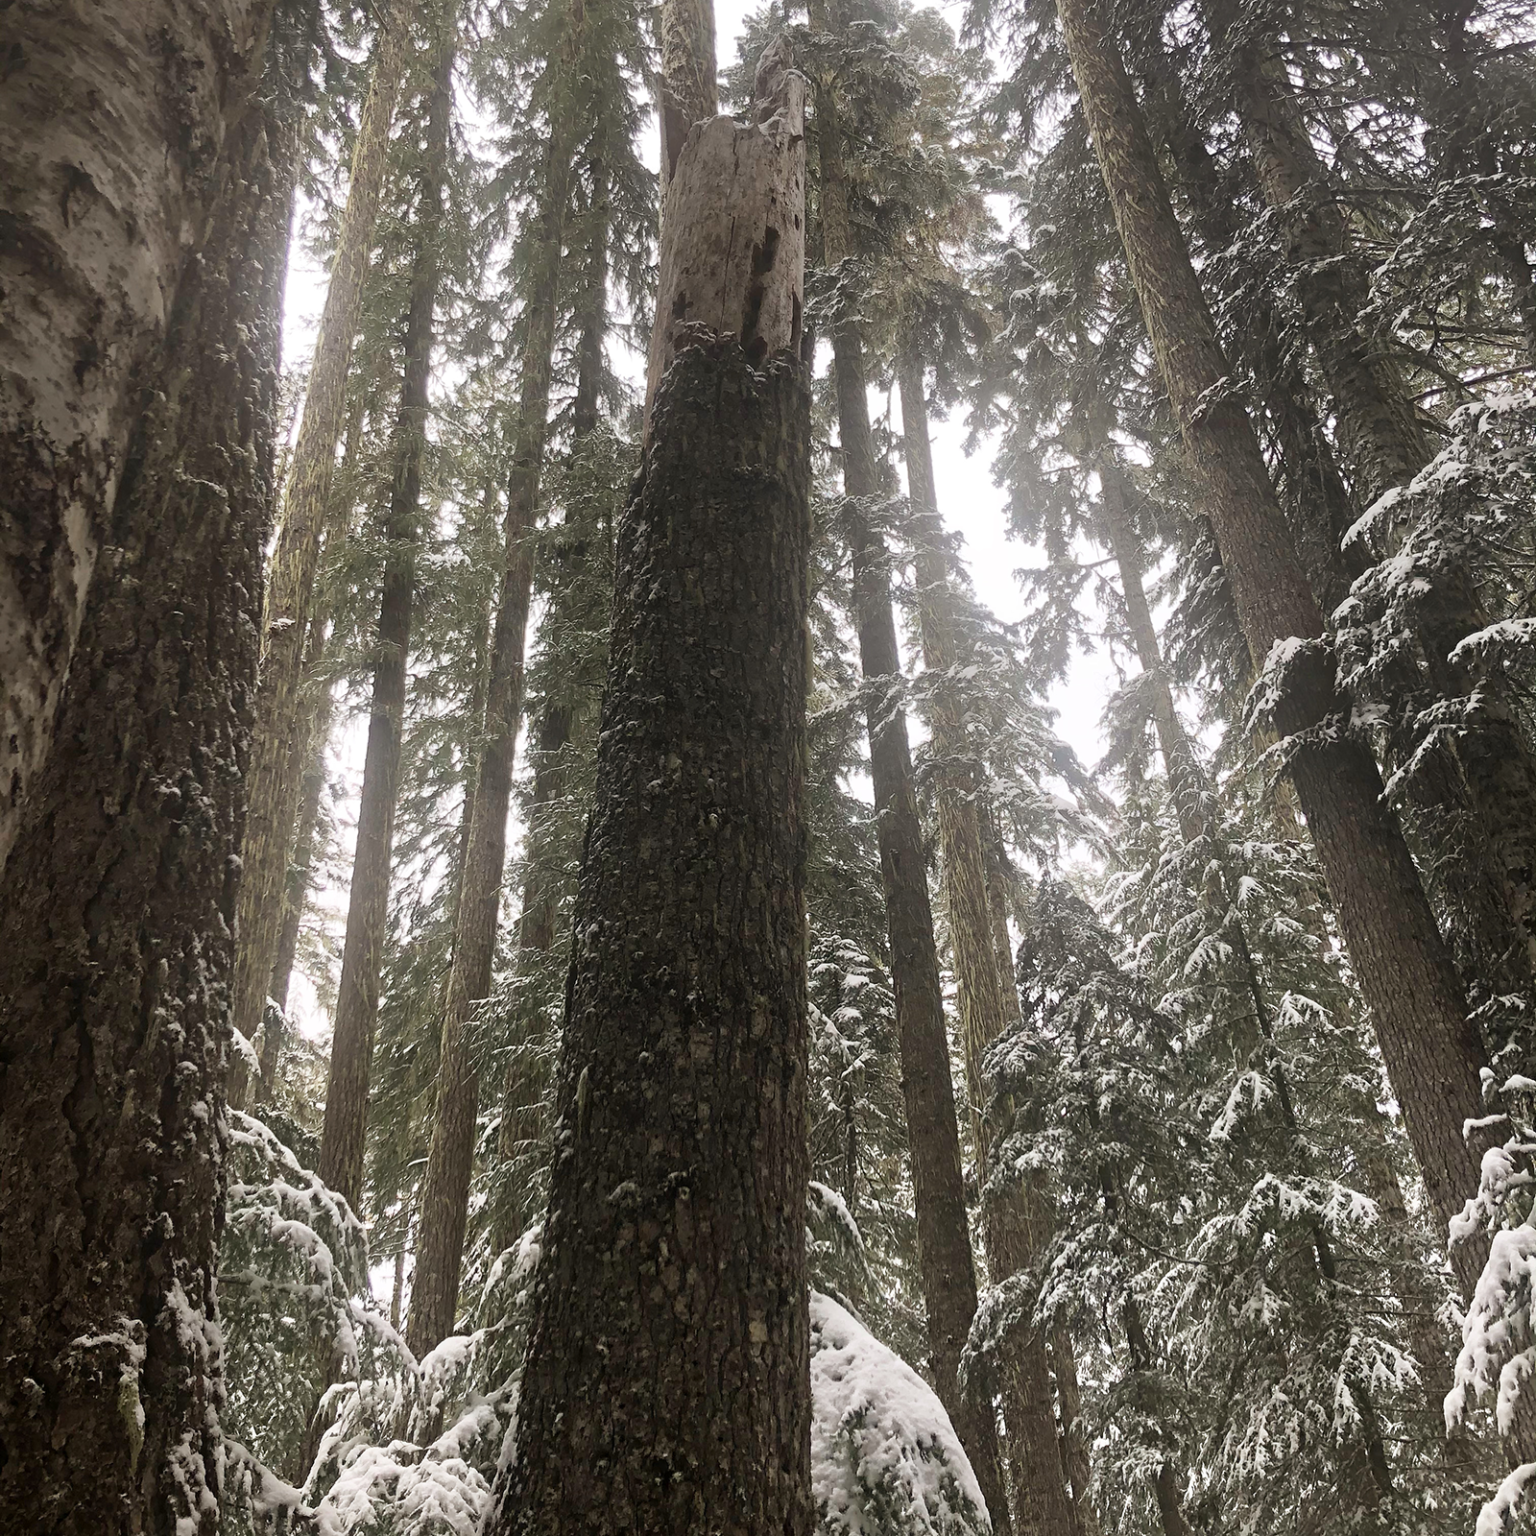 Flat Country timber sale, Unit 1130 (photo by Cascadia Wildlands).